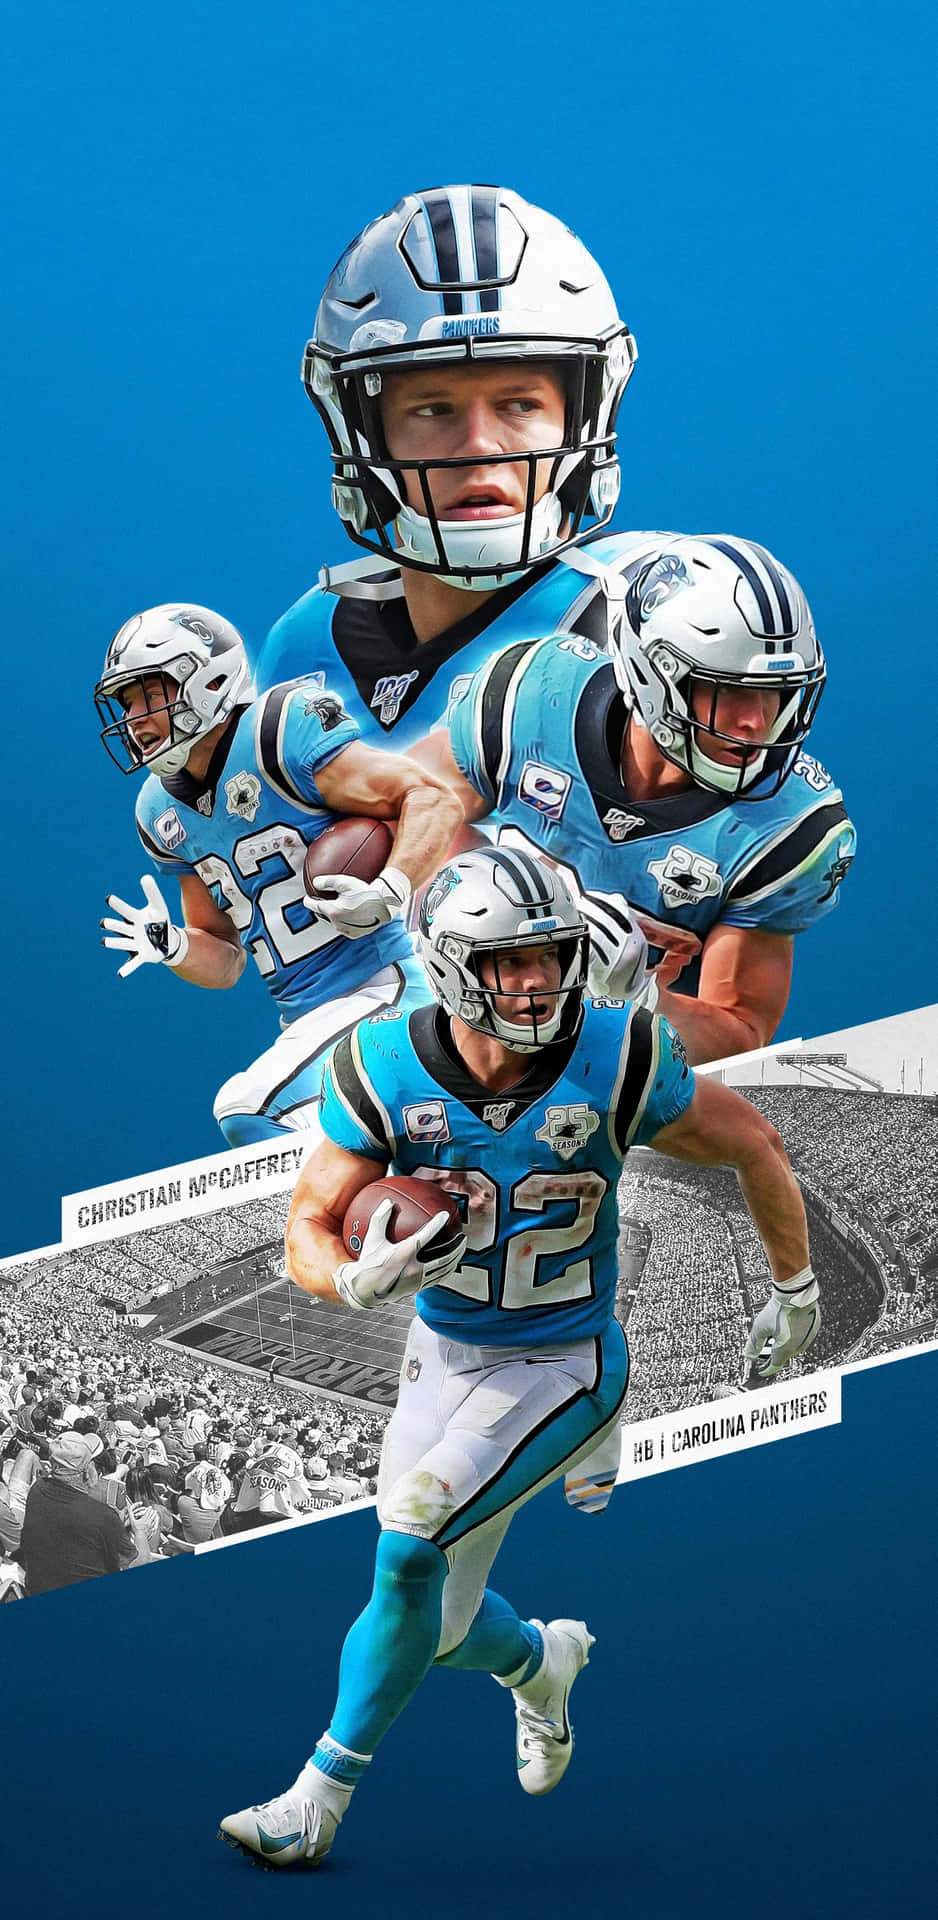 "Christian McCaffrey showing off his agility on the field" Wallpaper